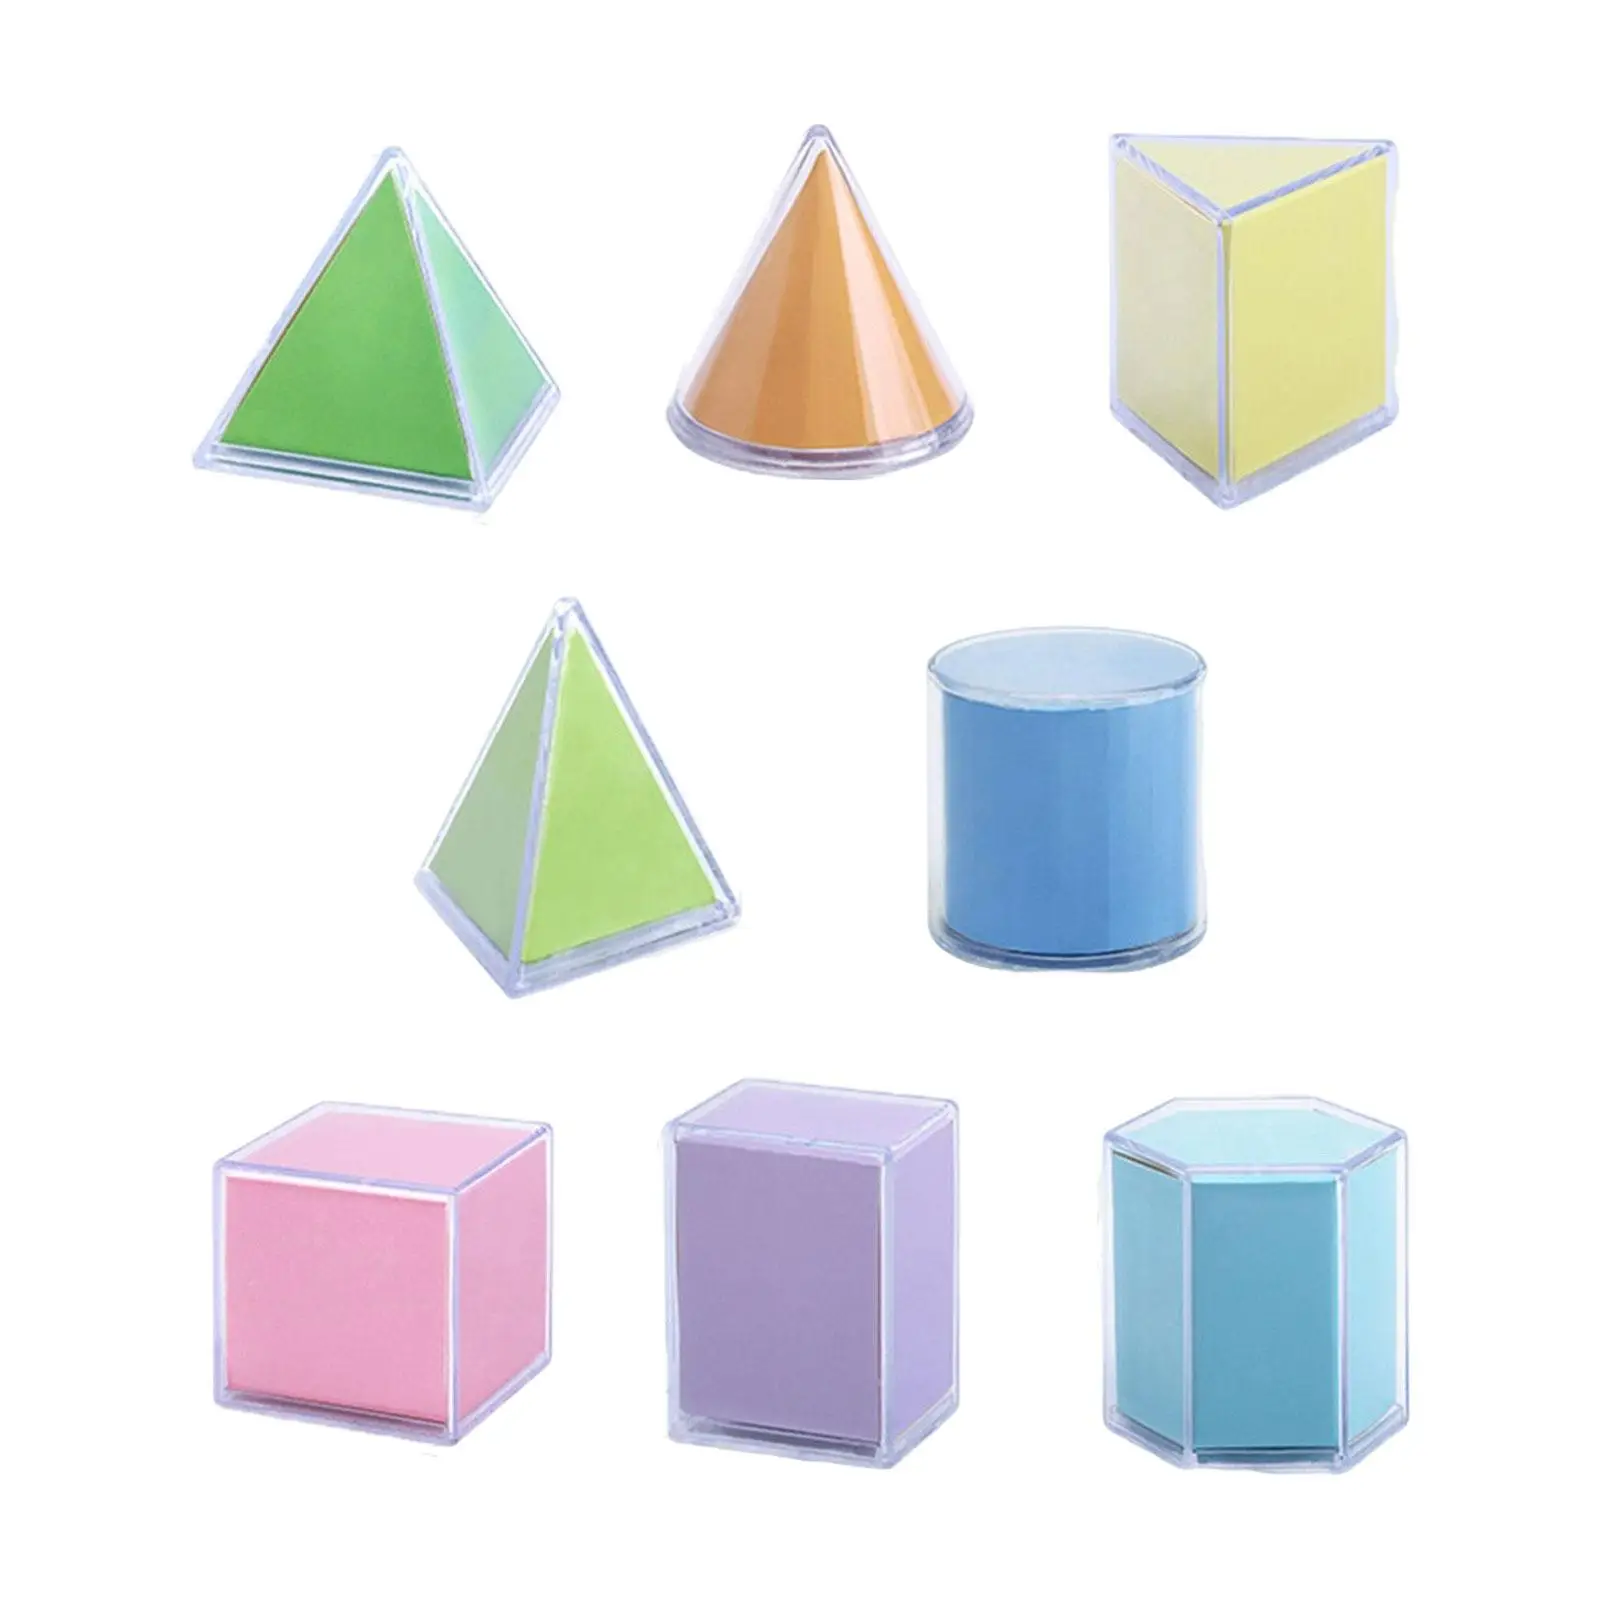 8Pcs 3D Shapes Geometric Shape Sorter Sorting Toy Stacking Game for Kids